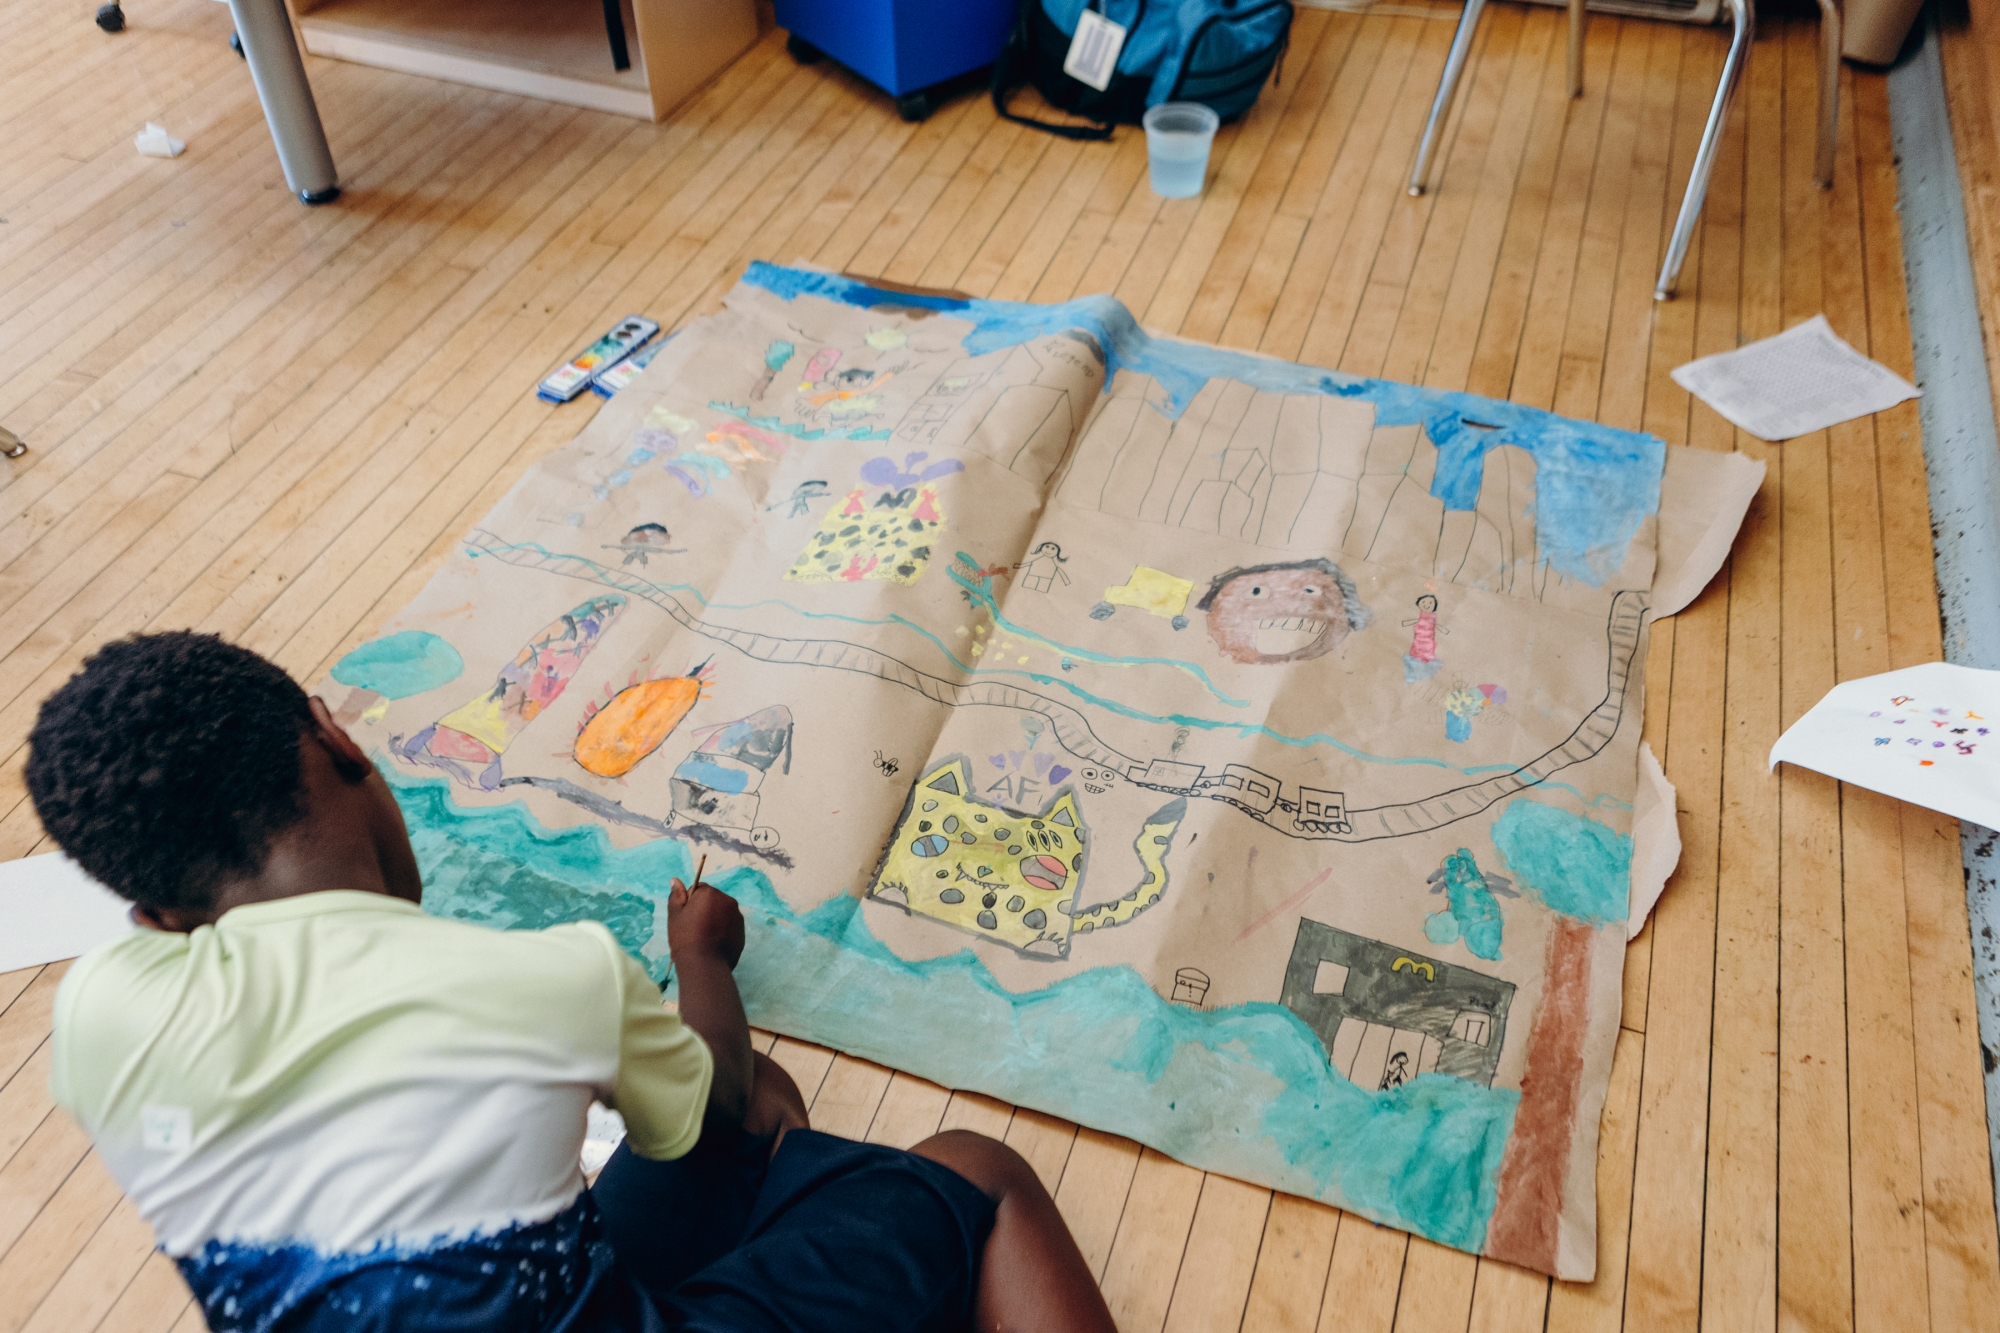 A Henry C. Lea Elementary School student sits on the wood floor in the foreground, painting with teal watercolor on a large class art project on brown construction paper featuring people, vehicles, animals, a train, a McDonald